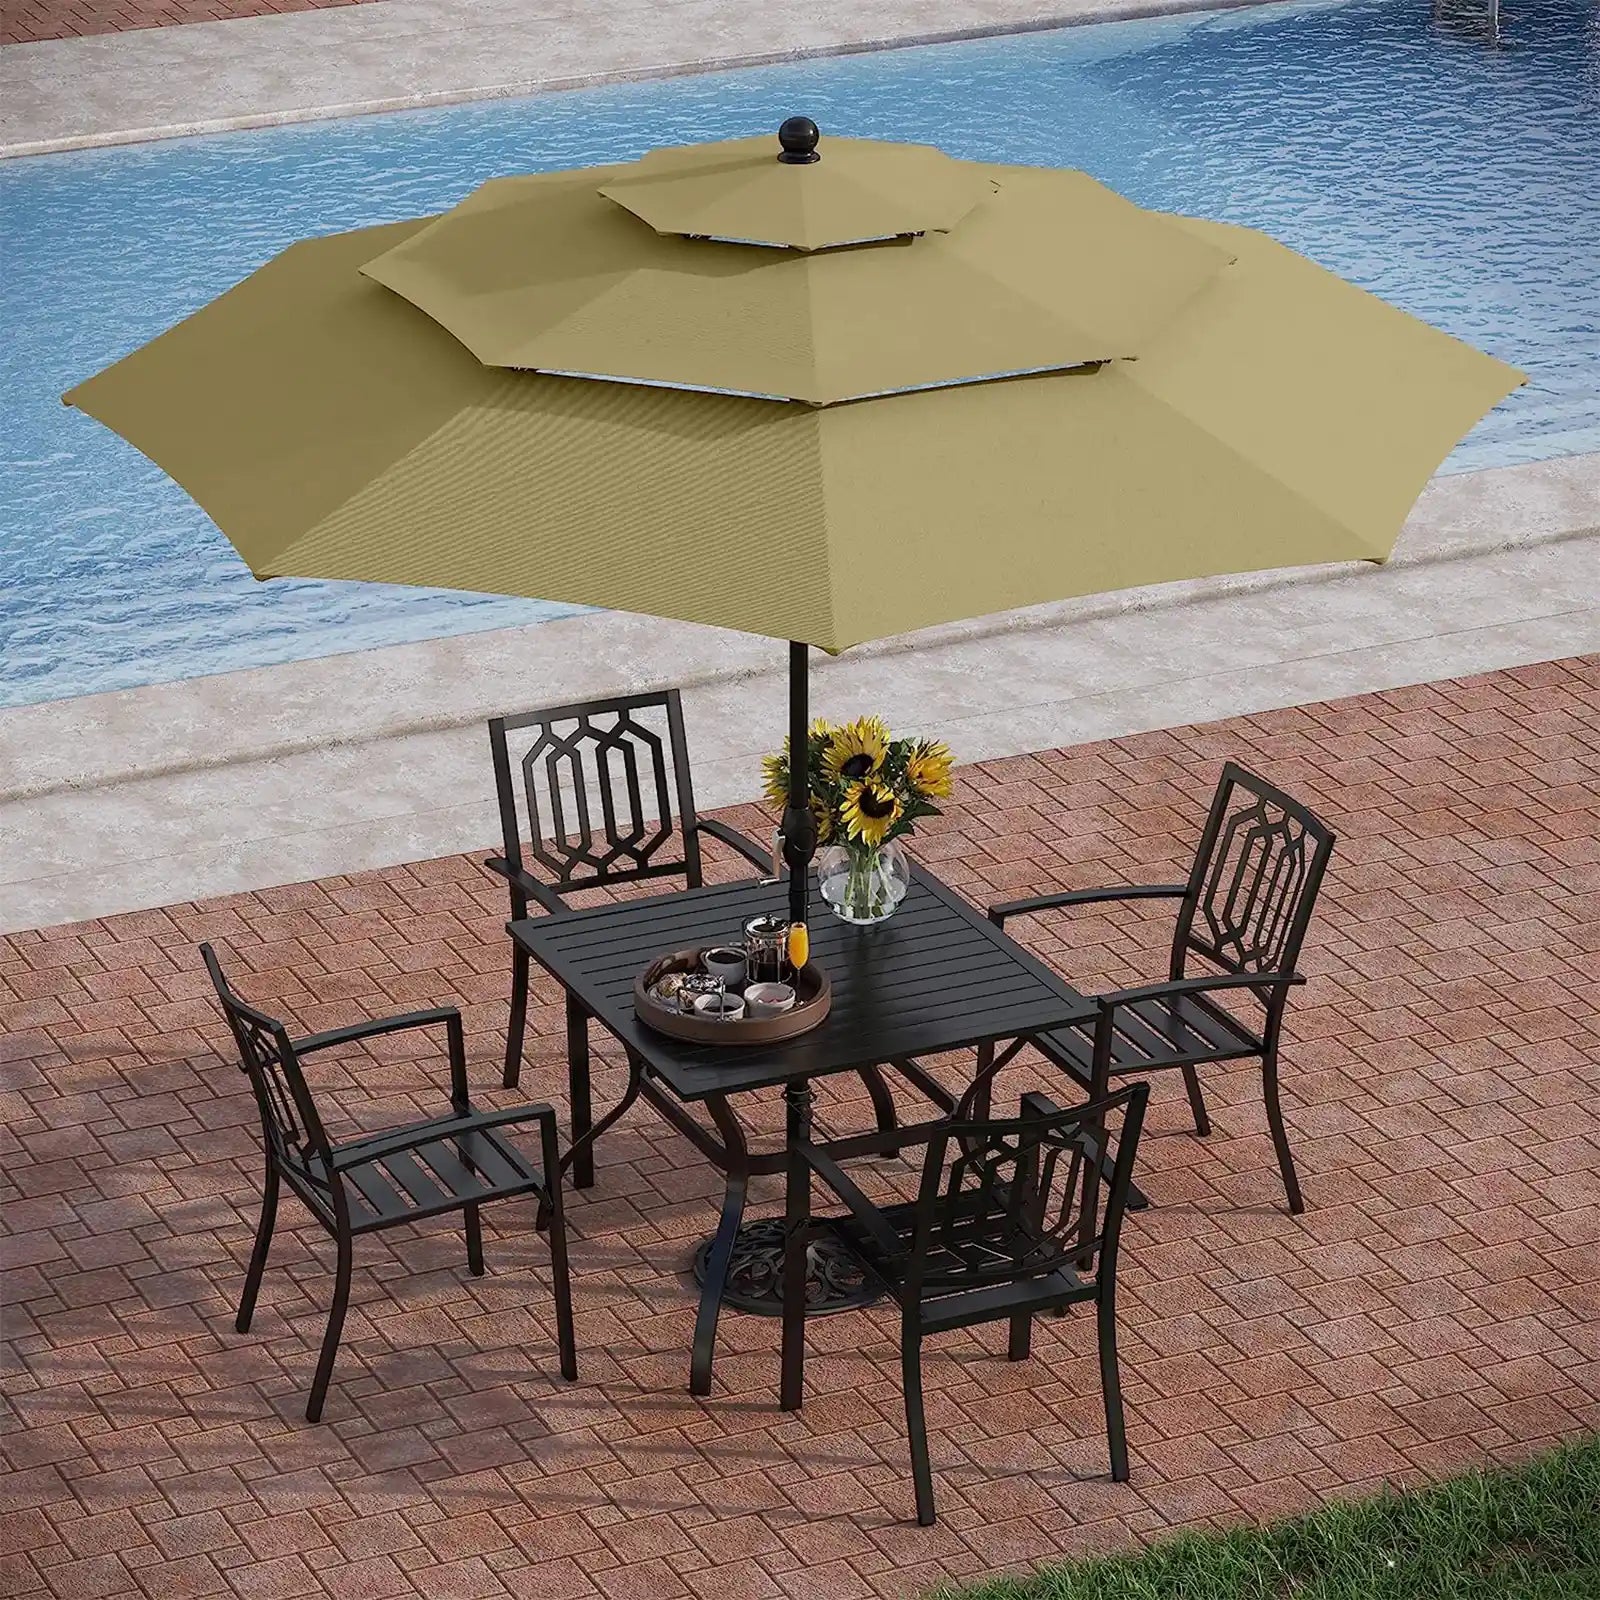 Patio Dining Set 6 pcs with Umbrella,1 Square Metal Table, 4 Metal Outdoor Stackable Chairs and 10ft 3 Tier Auto-tilt Umbrella